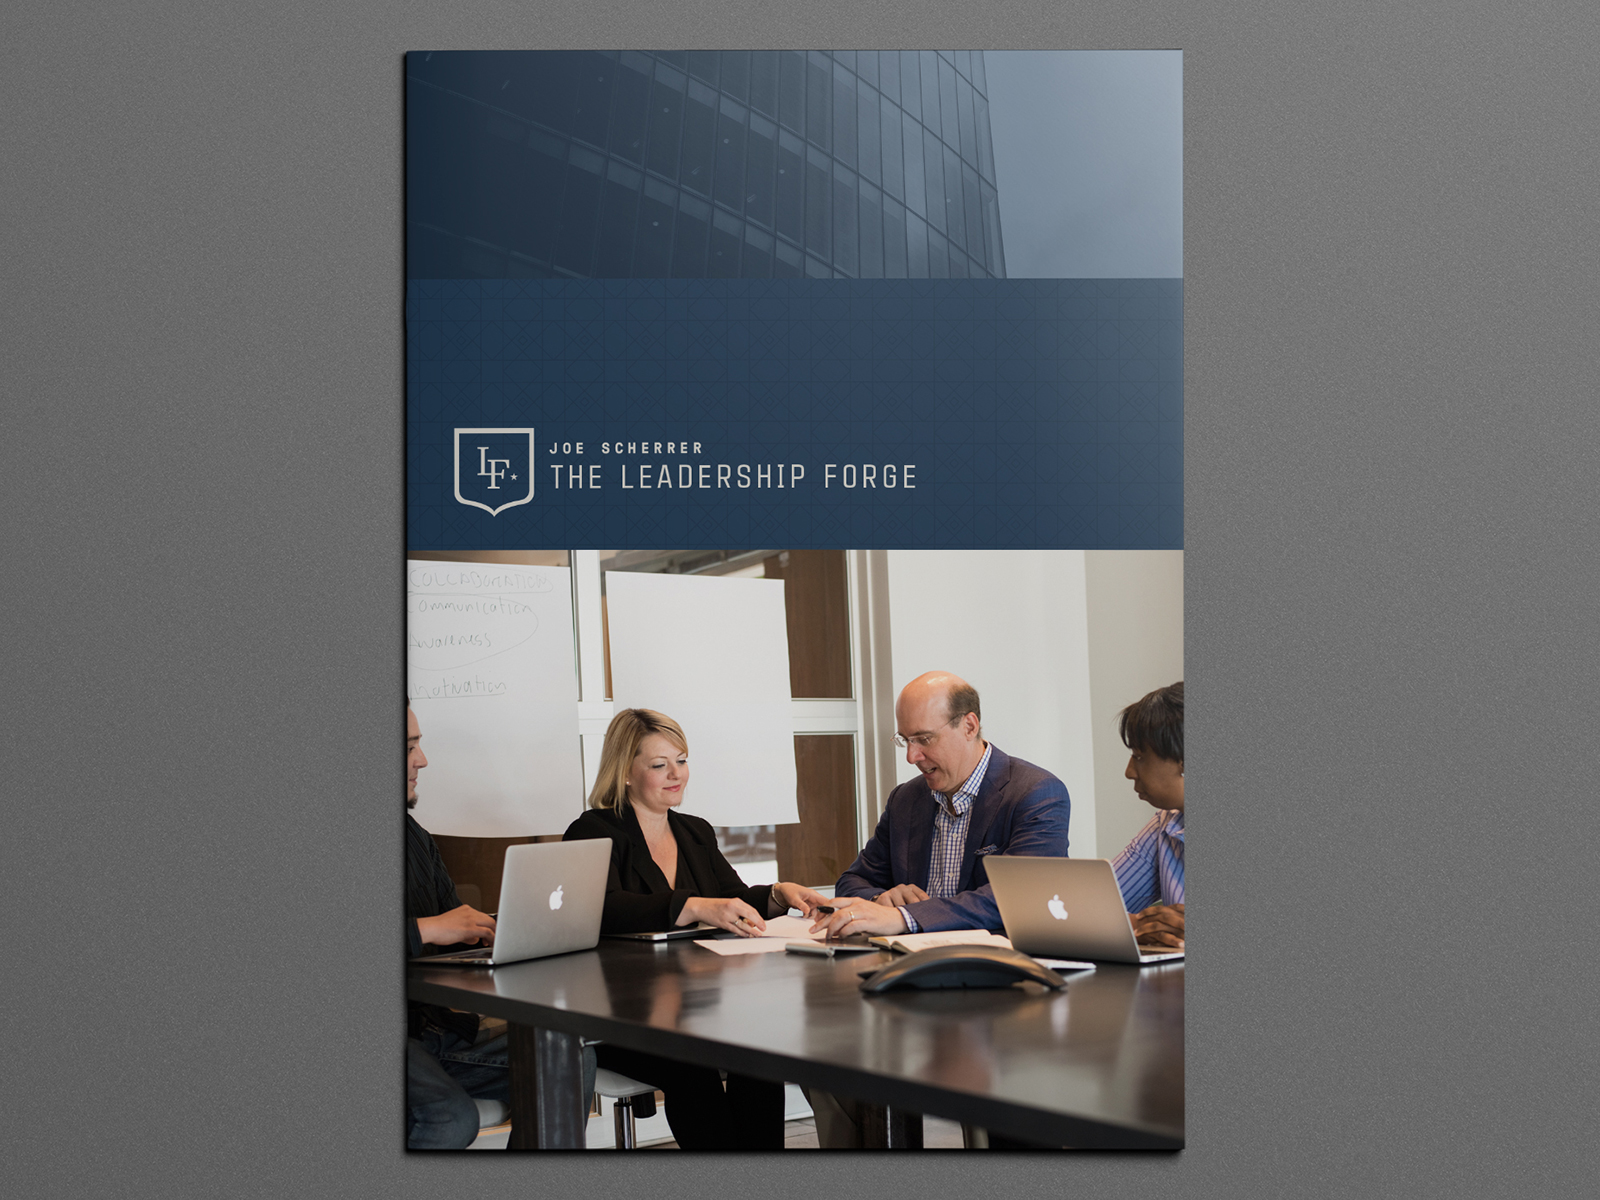 The Leadership Forge branding and brochure design